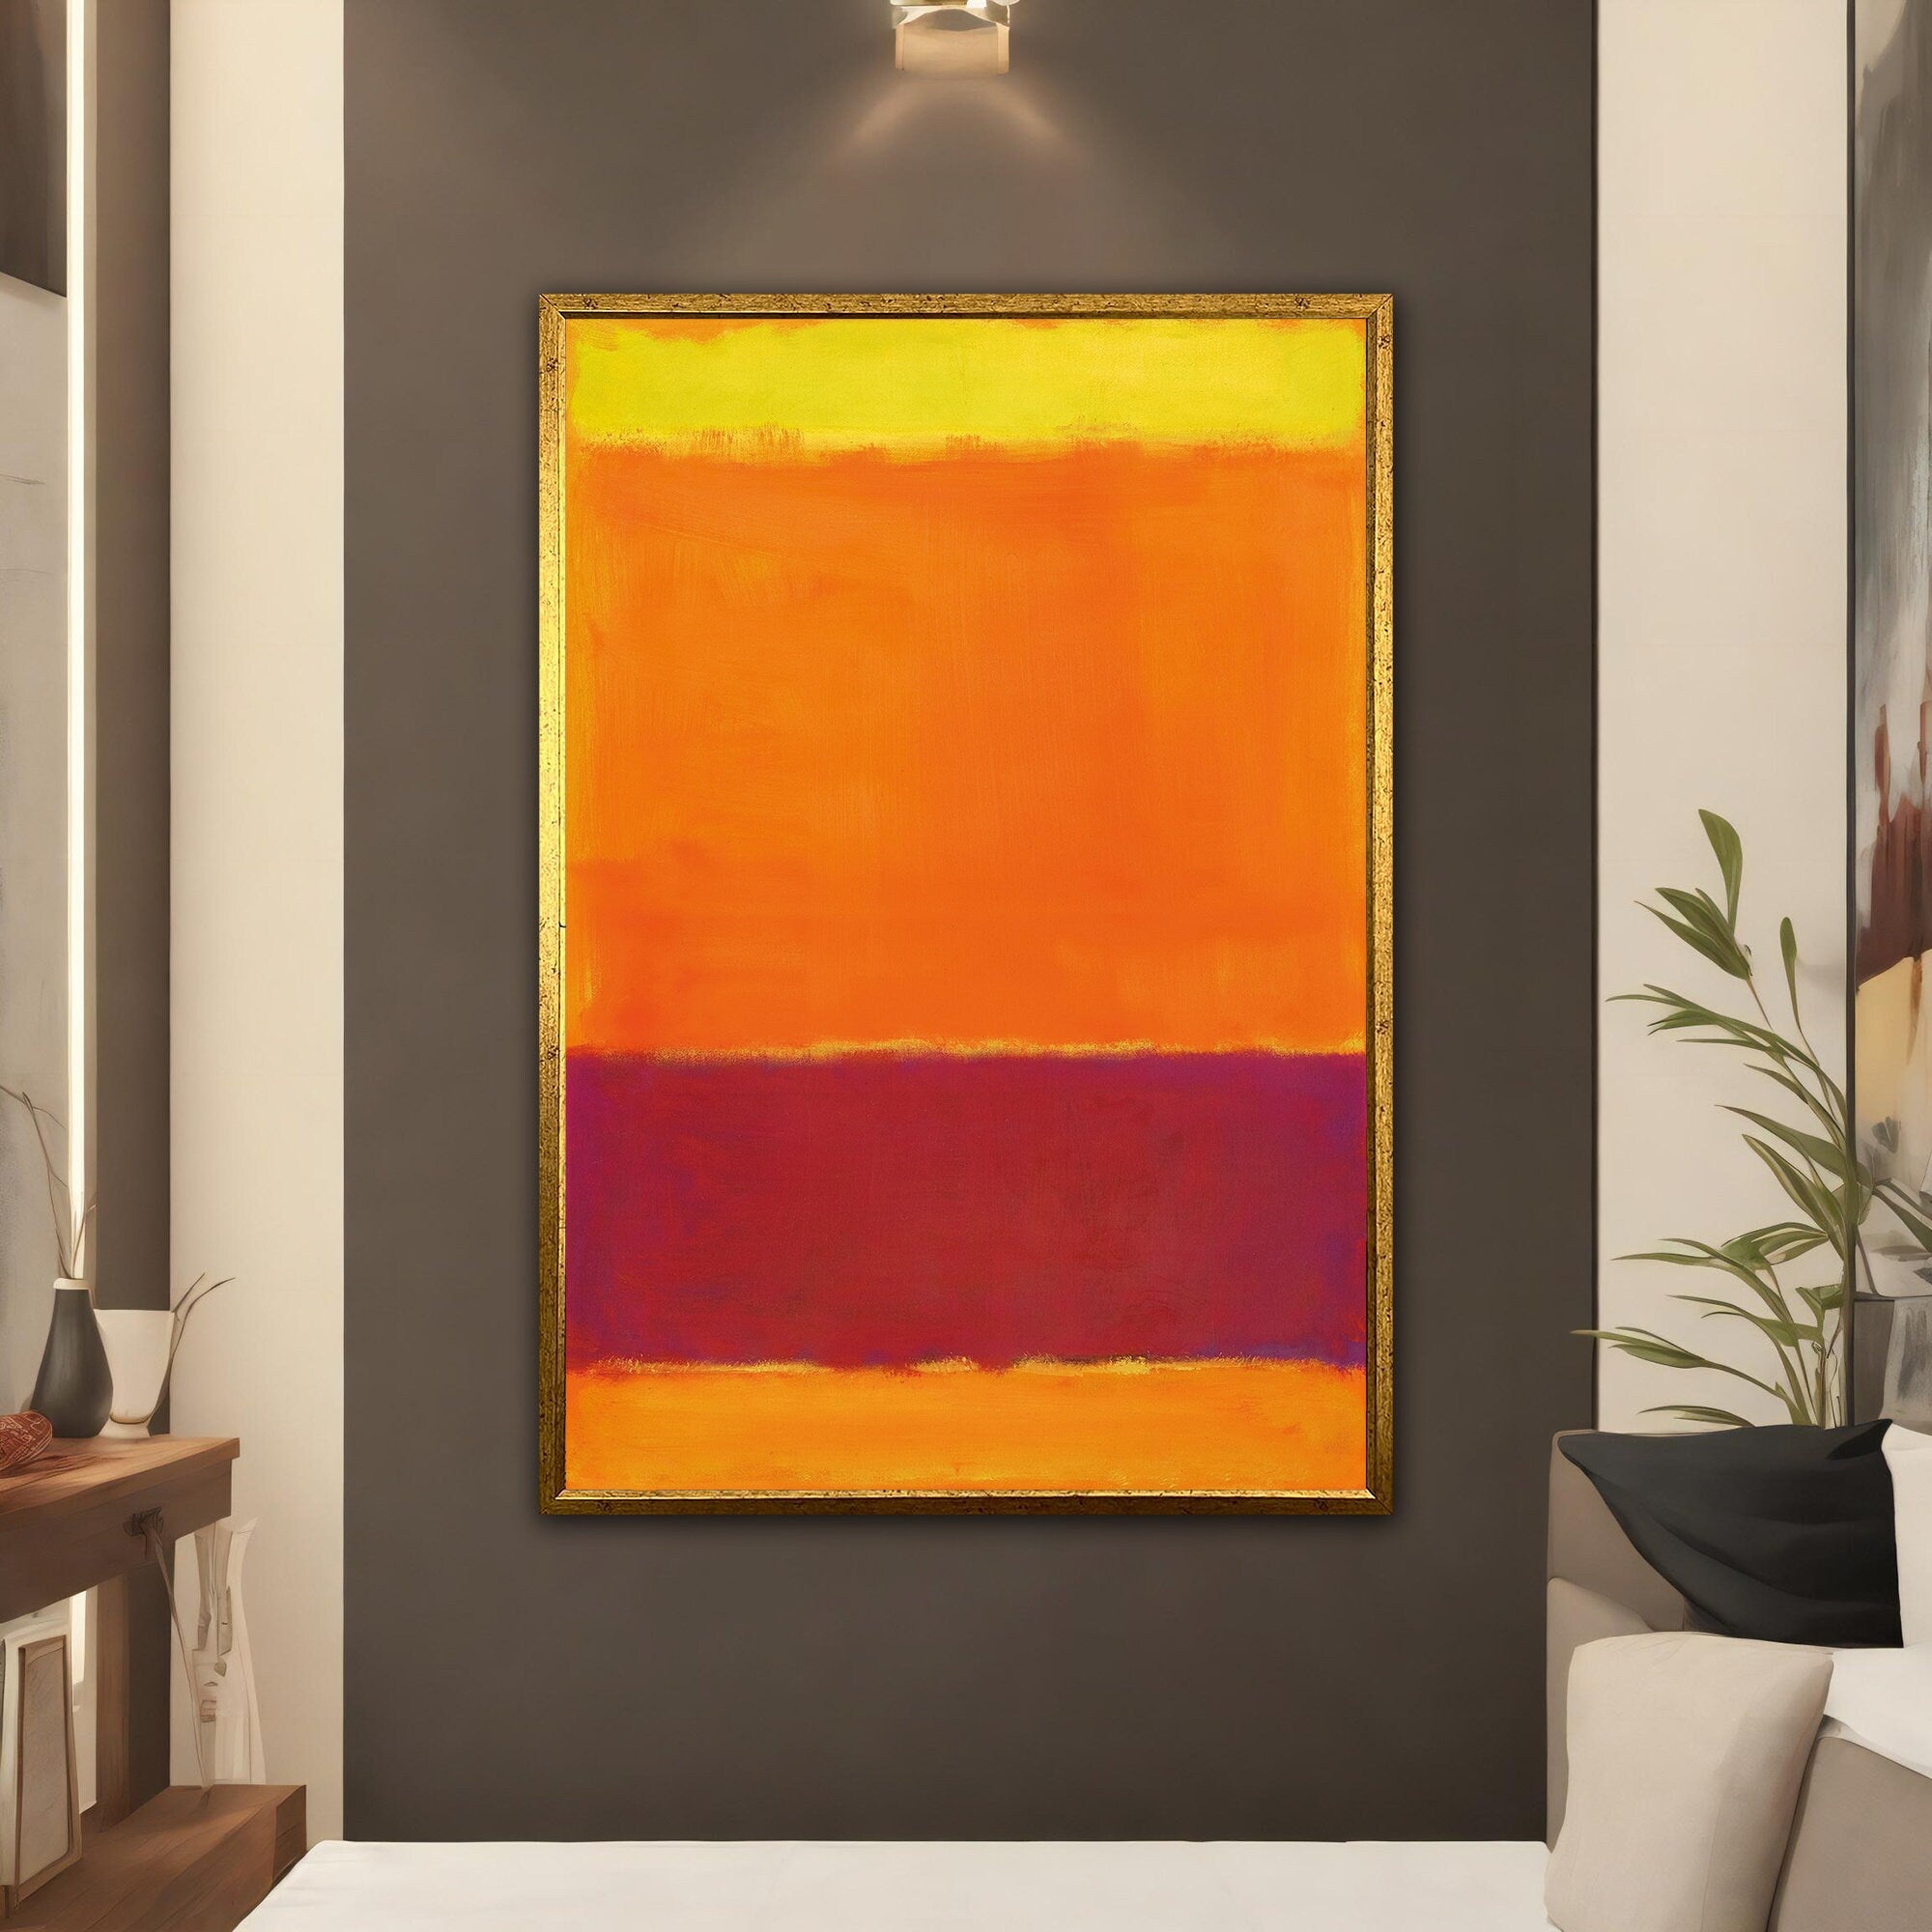 Orange and Red Canvas Print, Mark Rothko Style Abstract Wall Decor, Modern Art